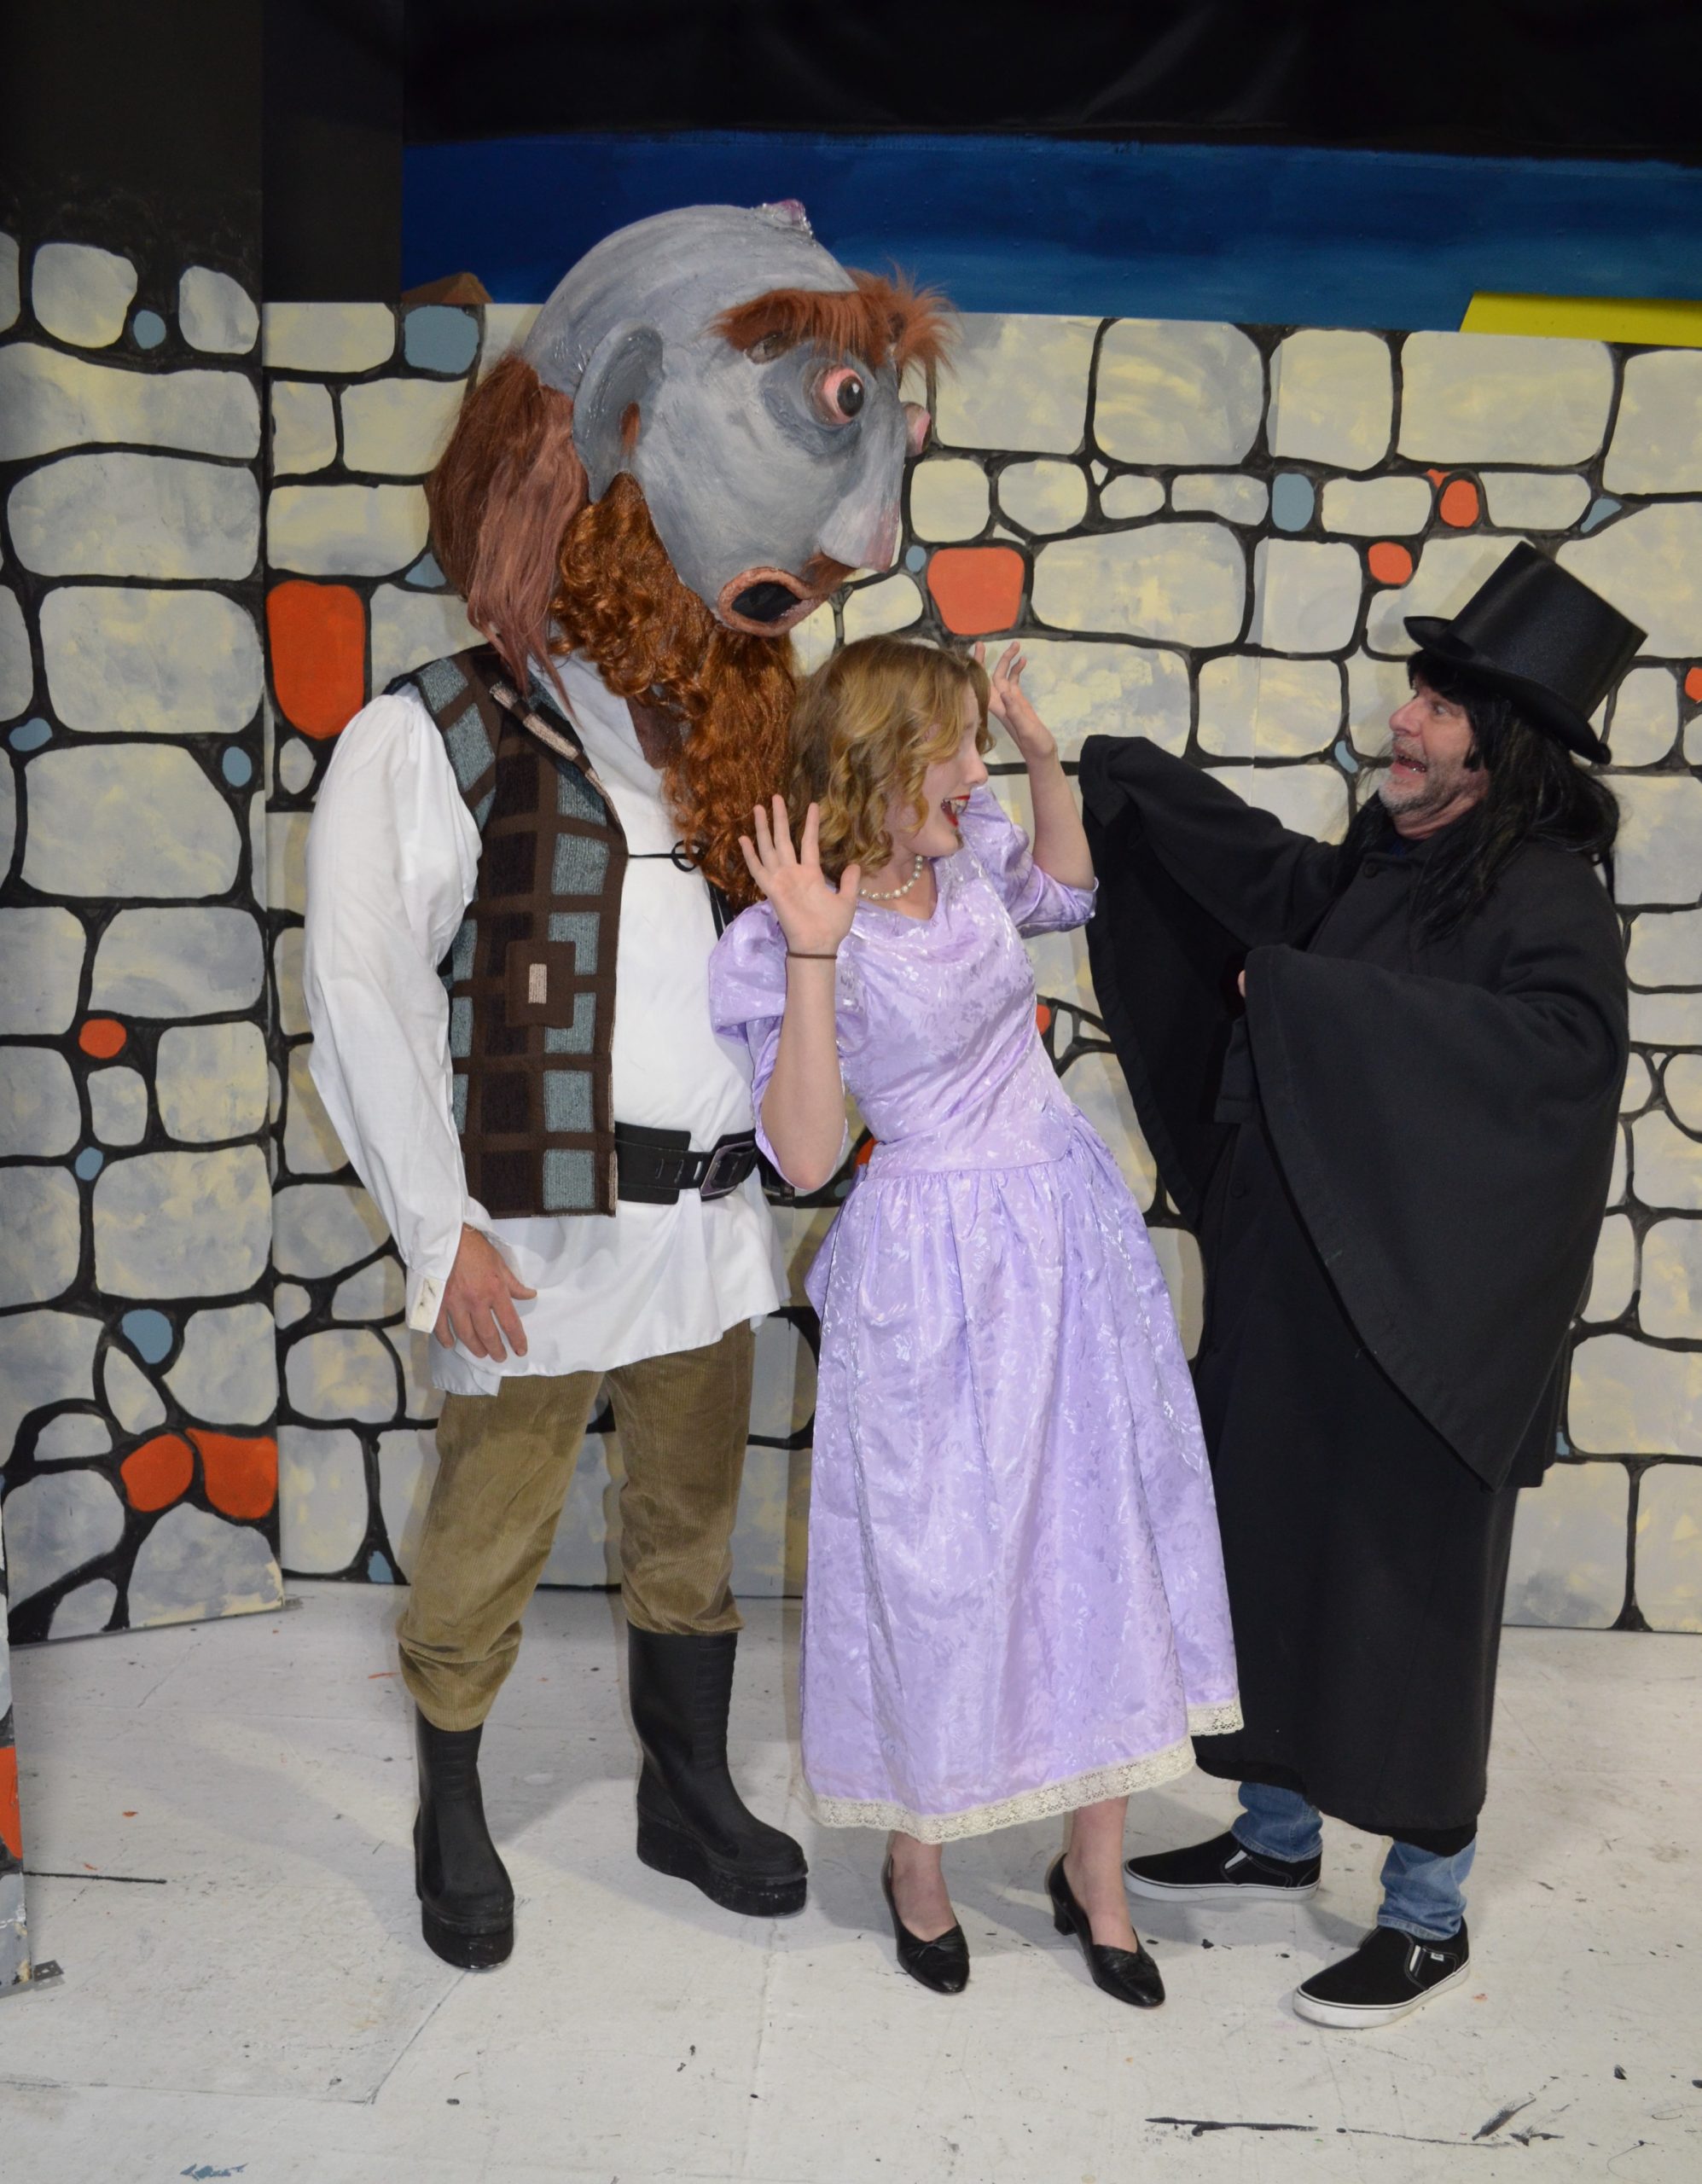 The Giant, the Princess and some random character on the set of Jack and The Beanstalk